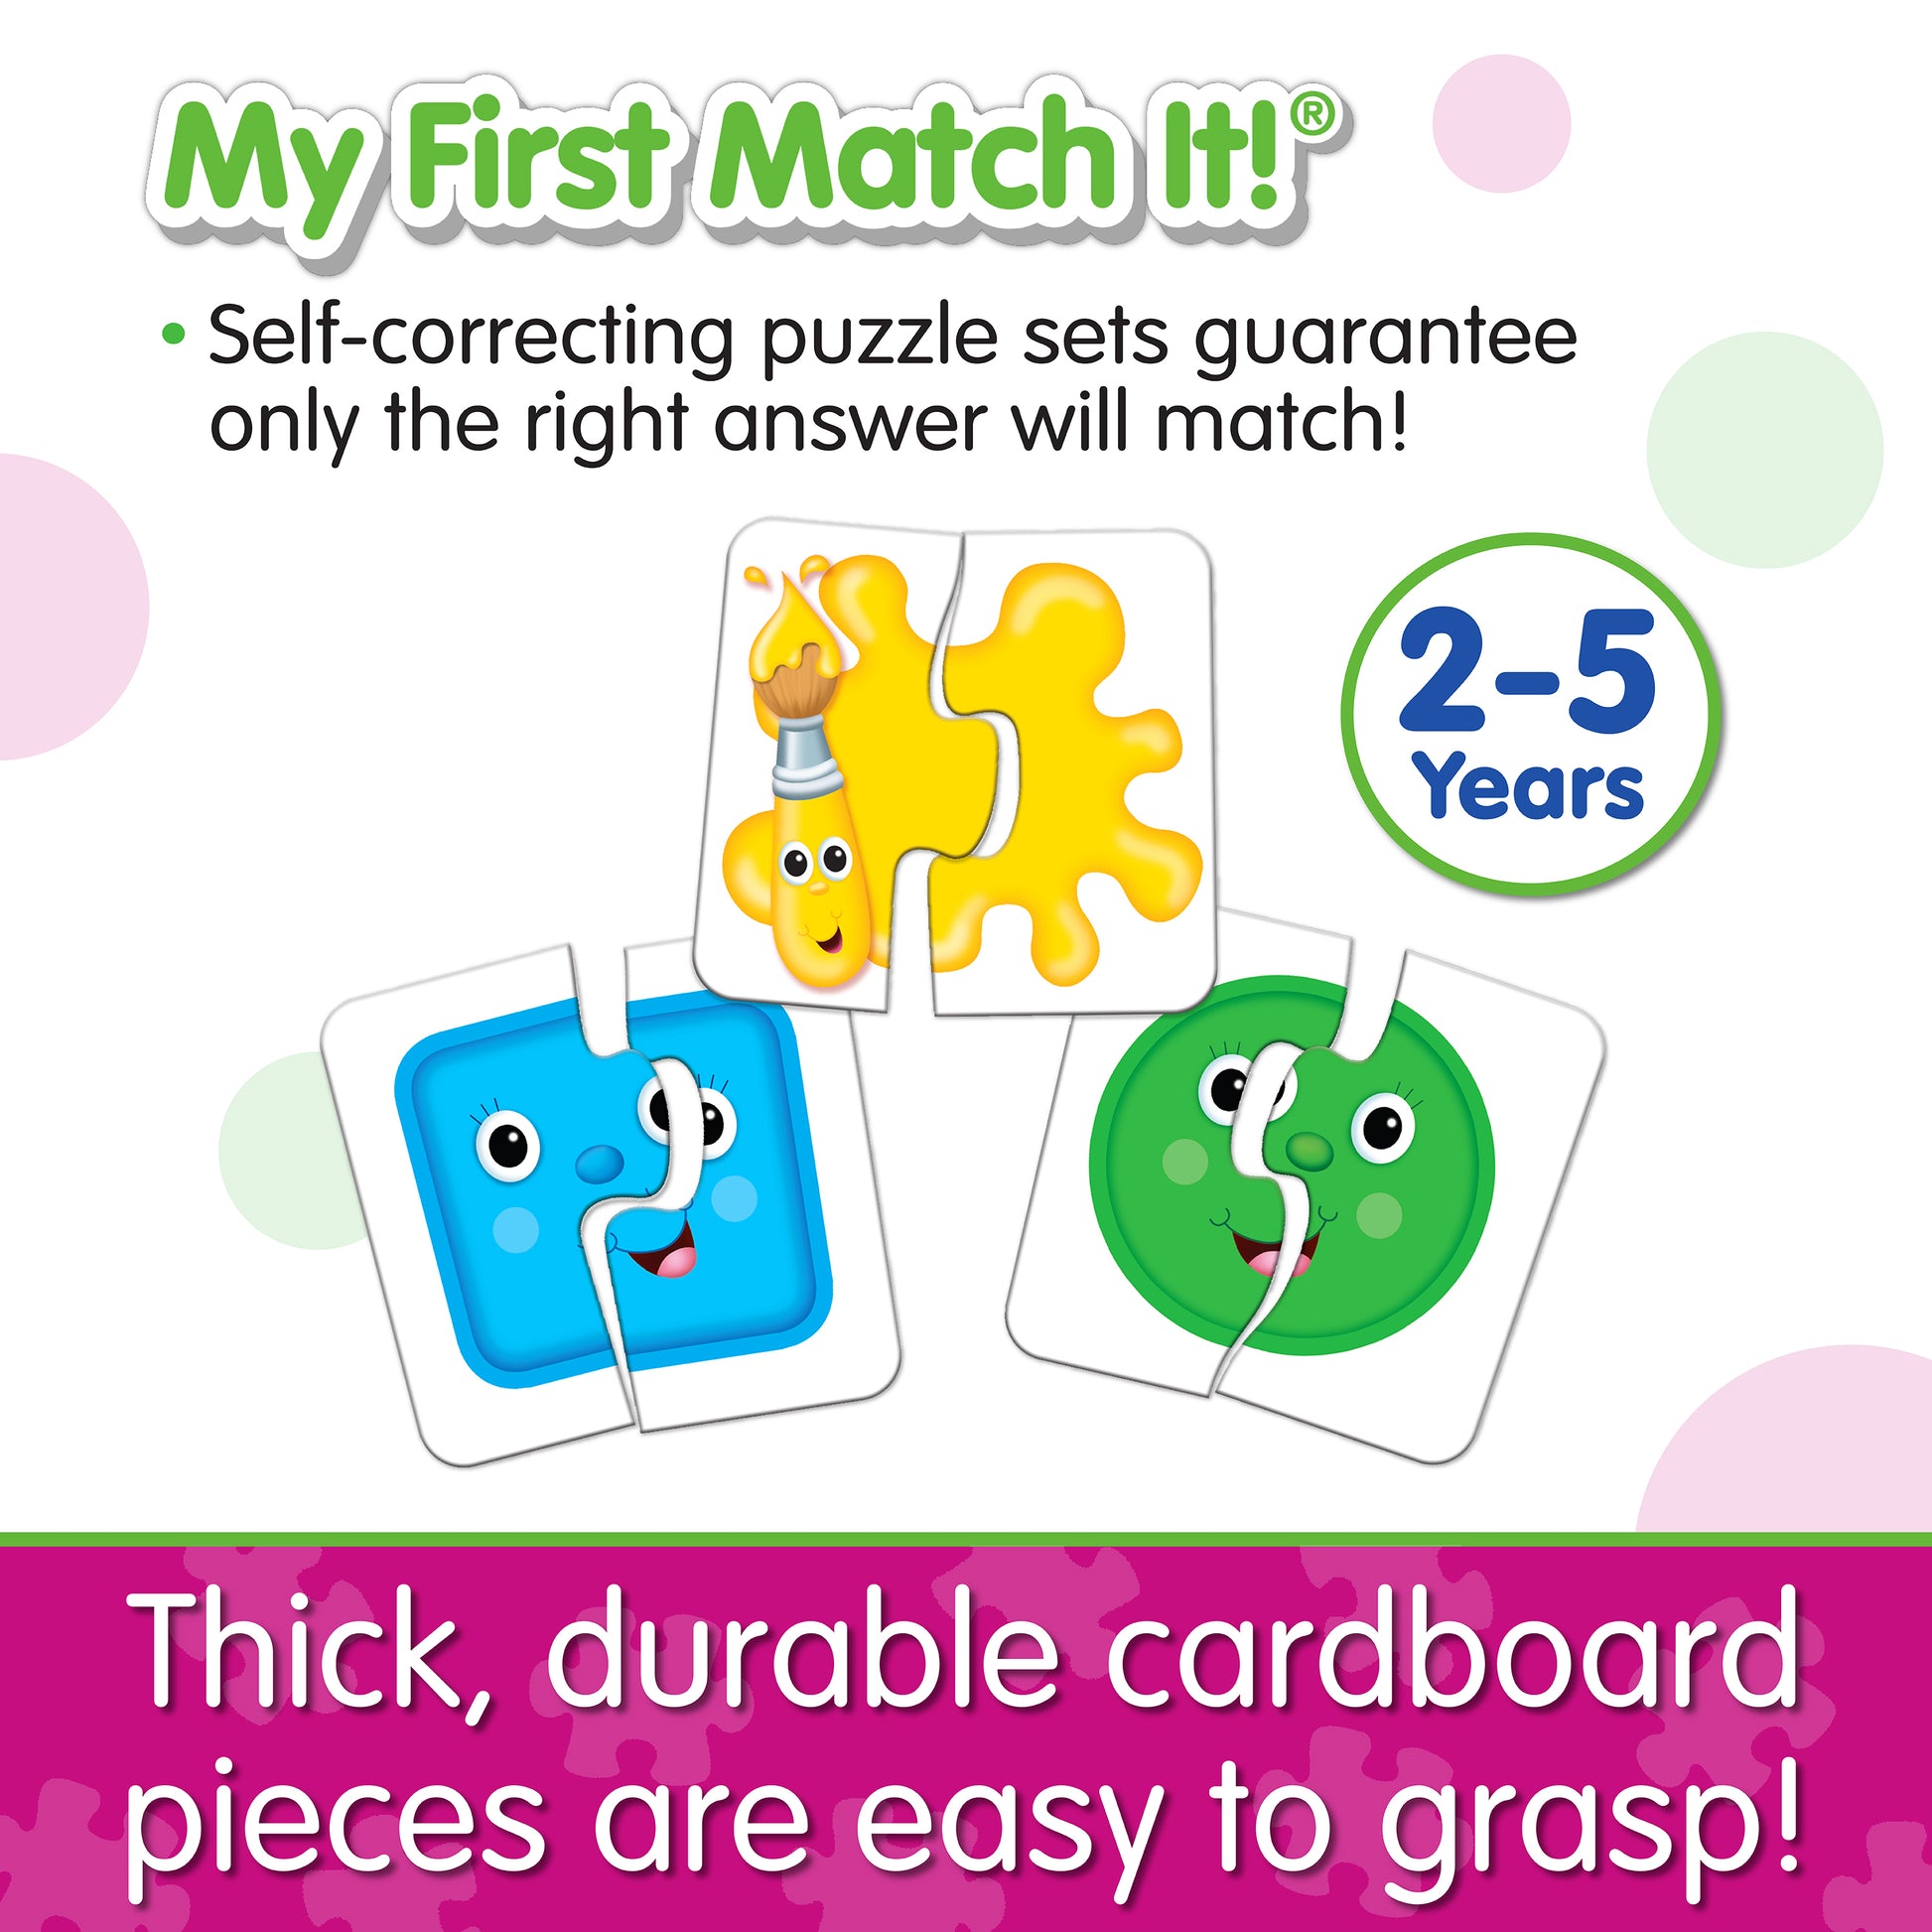 Infographic about My First Match It - Colors and Shapes' features that says, "Thick, durable cardboard pieces are easy to grasp!"